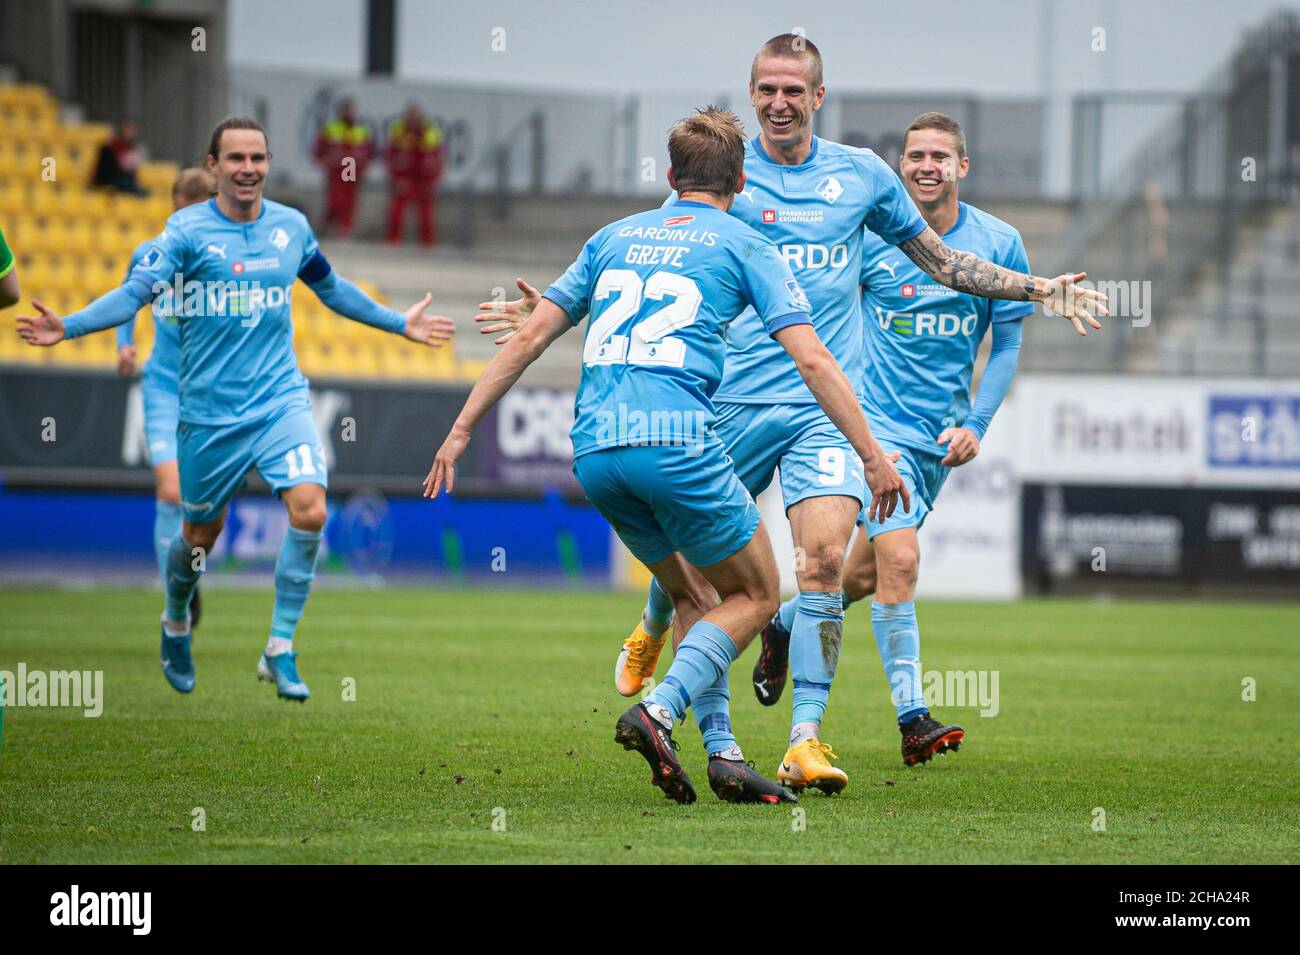 Horsens, Denmark. 13th Sep, 2020. Emil Riis Jakobsen (9) of Randers FC  scores for 0-2 during the 3F Superliga match between AC Horsens and Randers  FC at Casa Arena in Horsens. (Photo